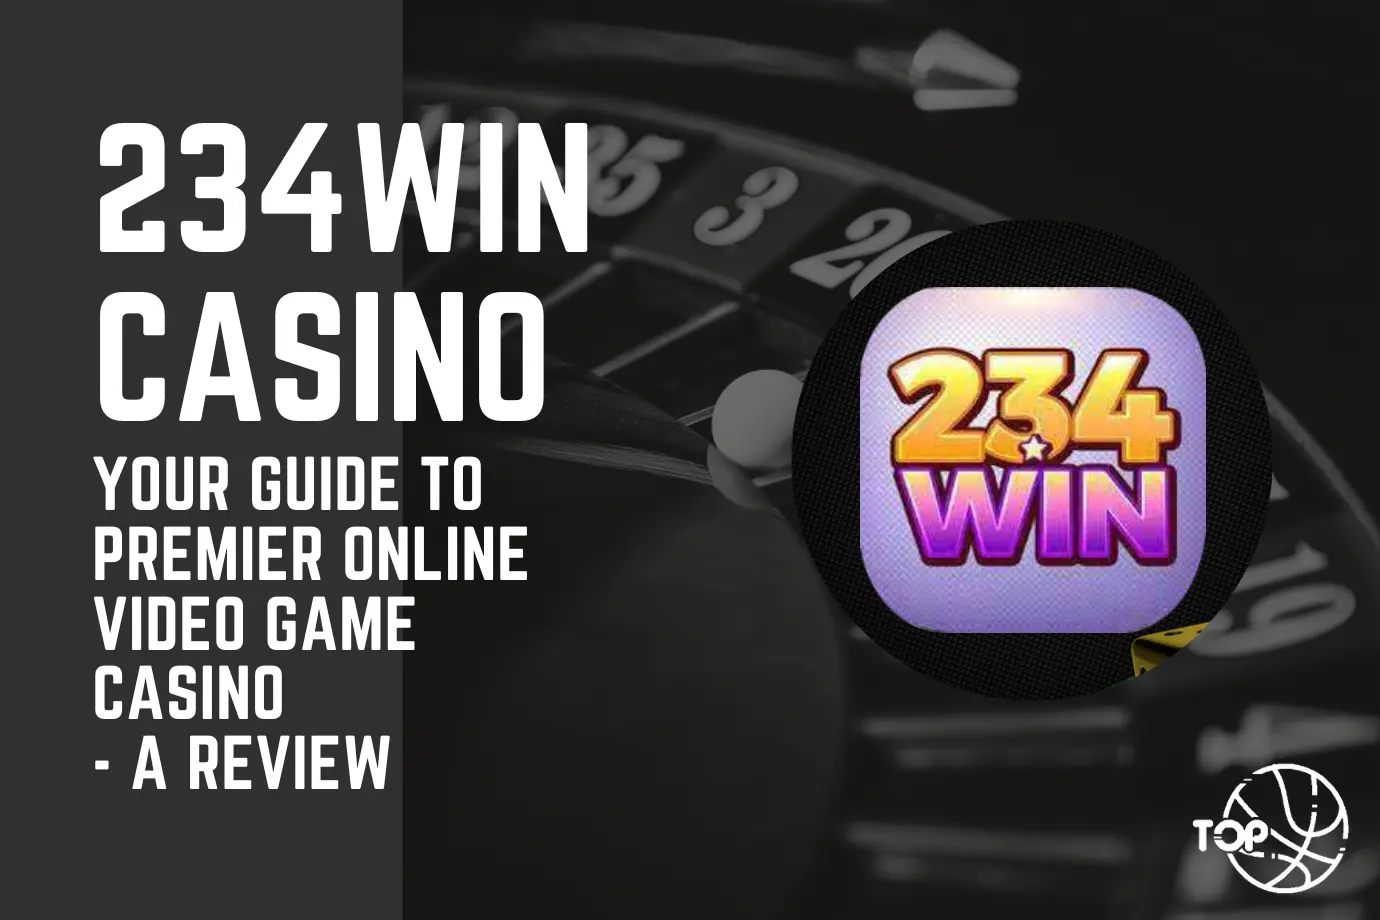 234WIN: Your Guide to Premier Online Video Game Casino - A Review